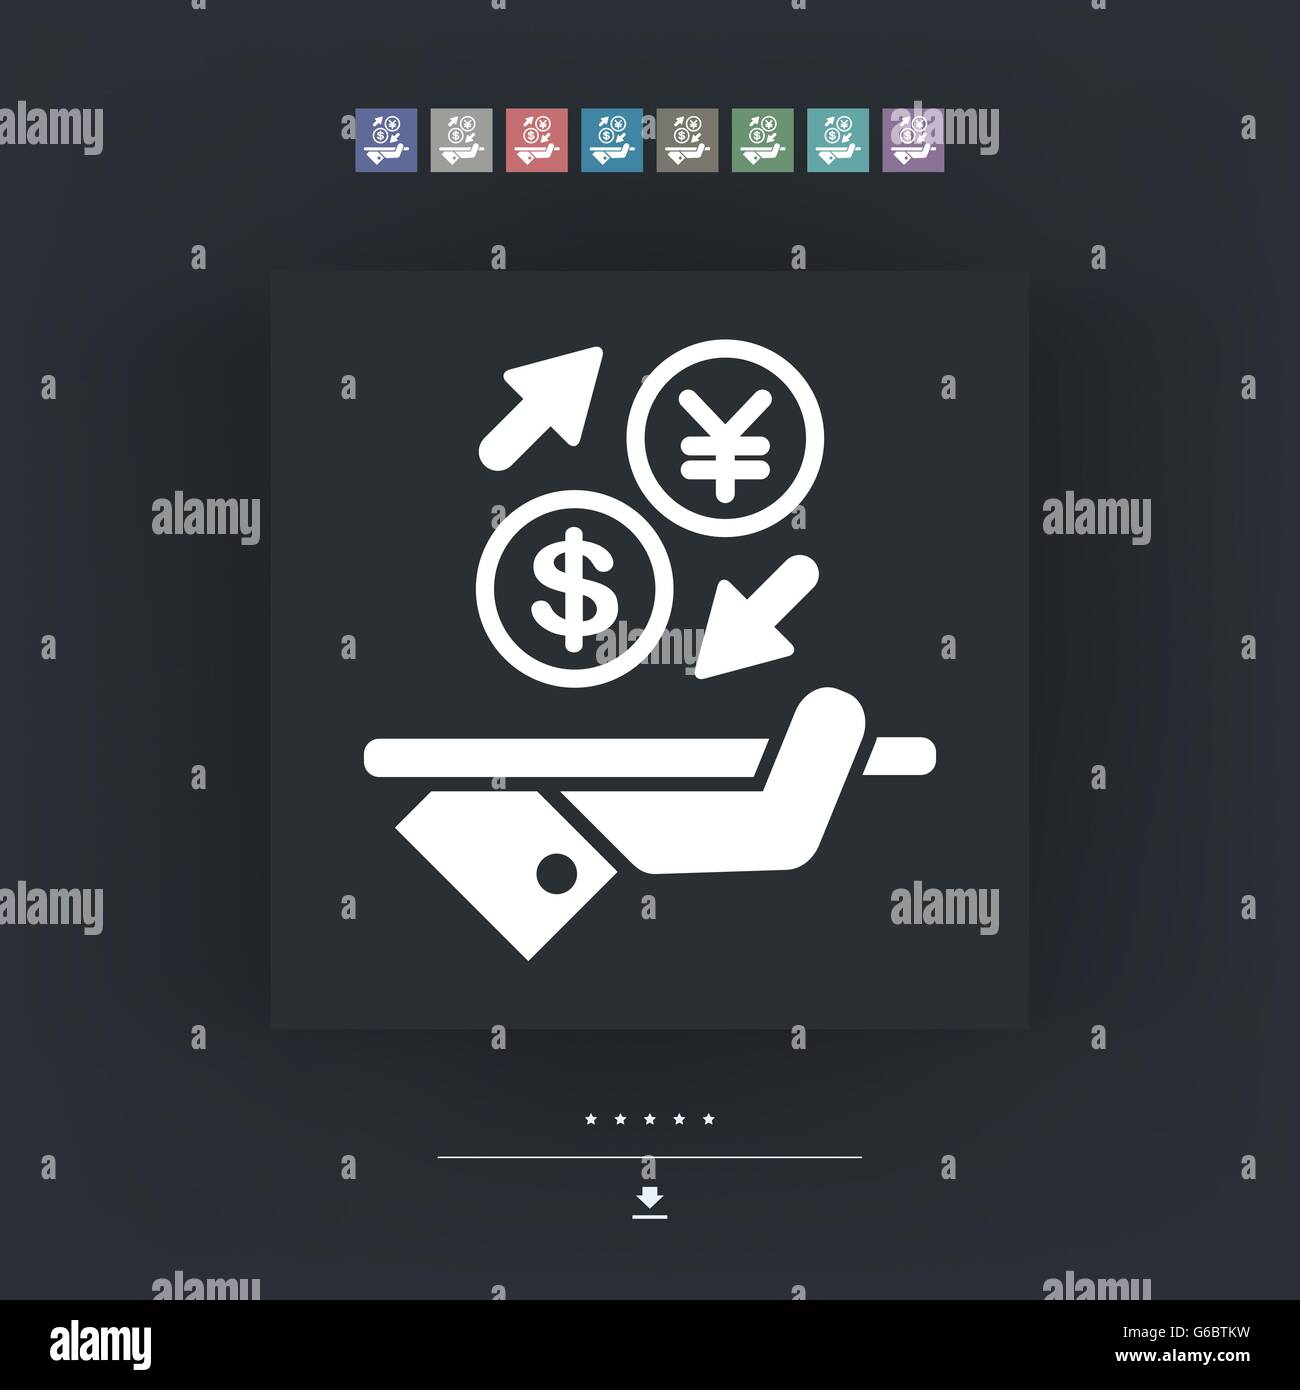 Dollar/Yuan - Foreign currency exchange icon Stock Vector